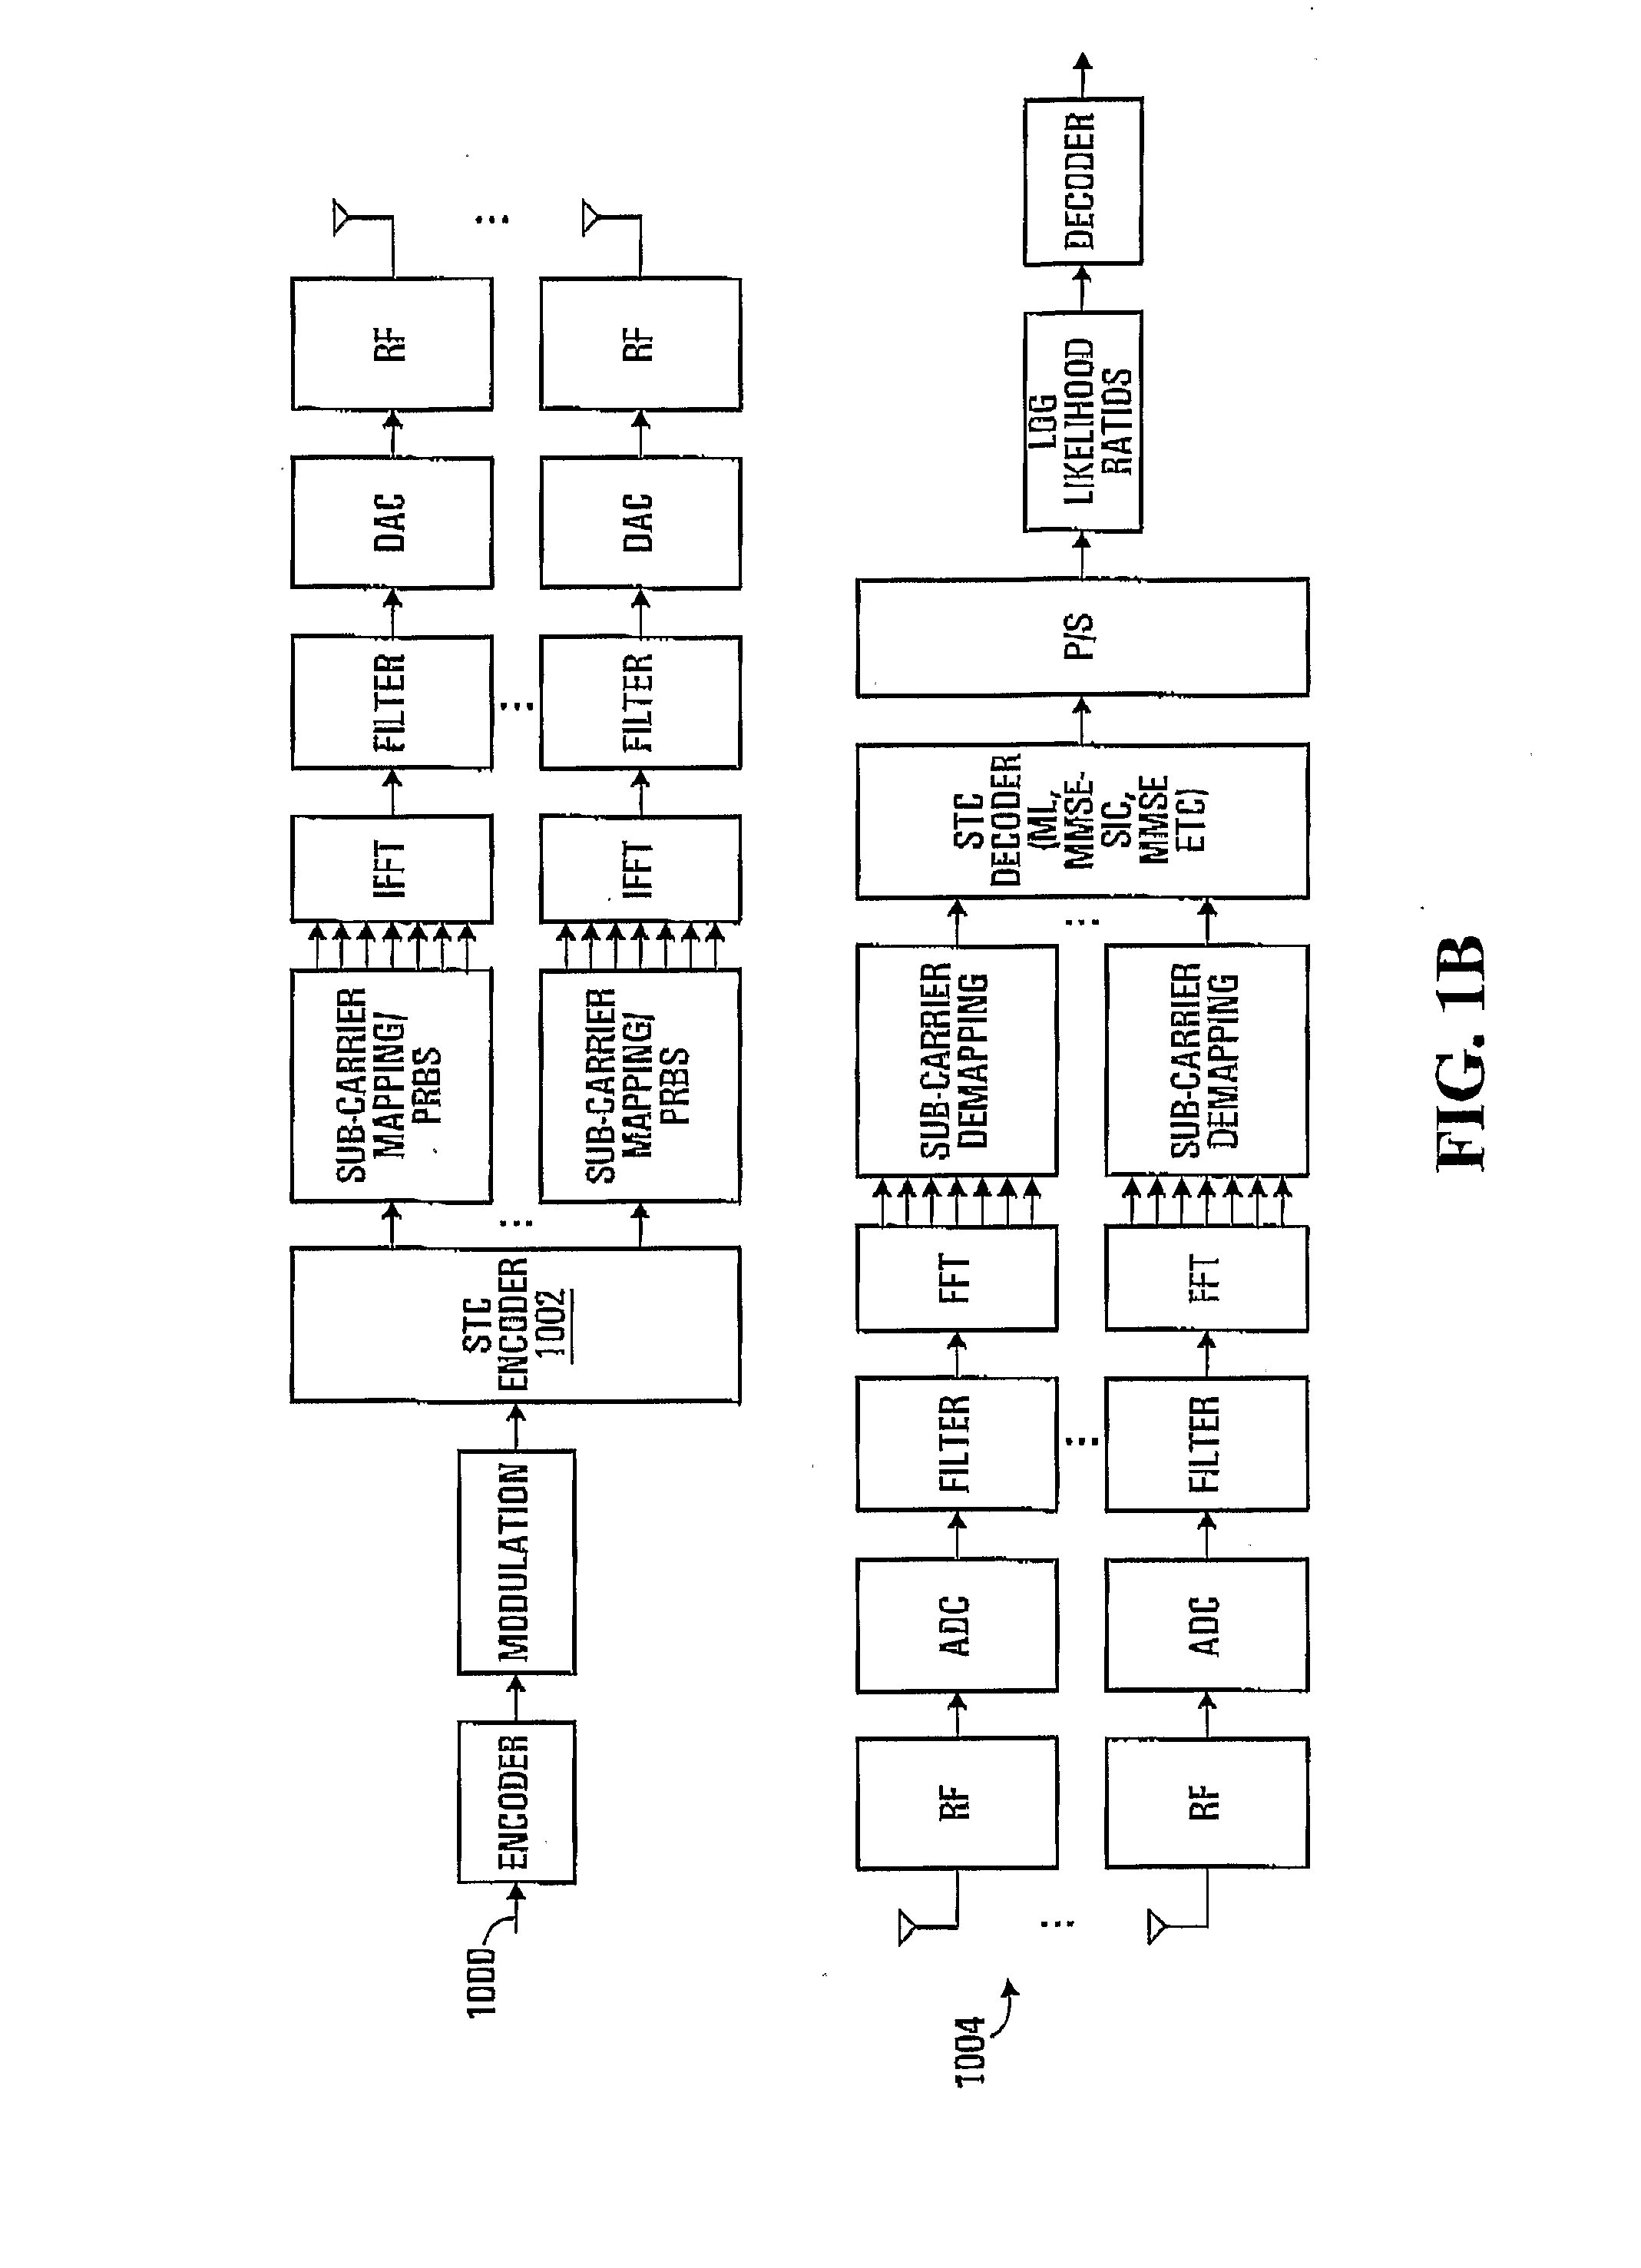 Methods For Supporting Mimo Transmission In Ofdm Applications